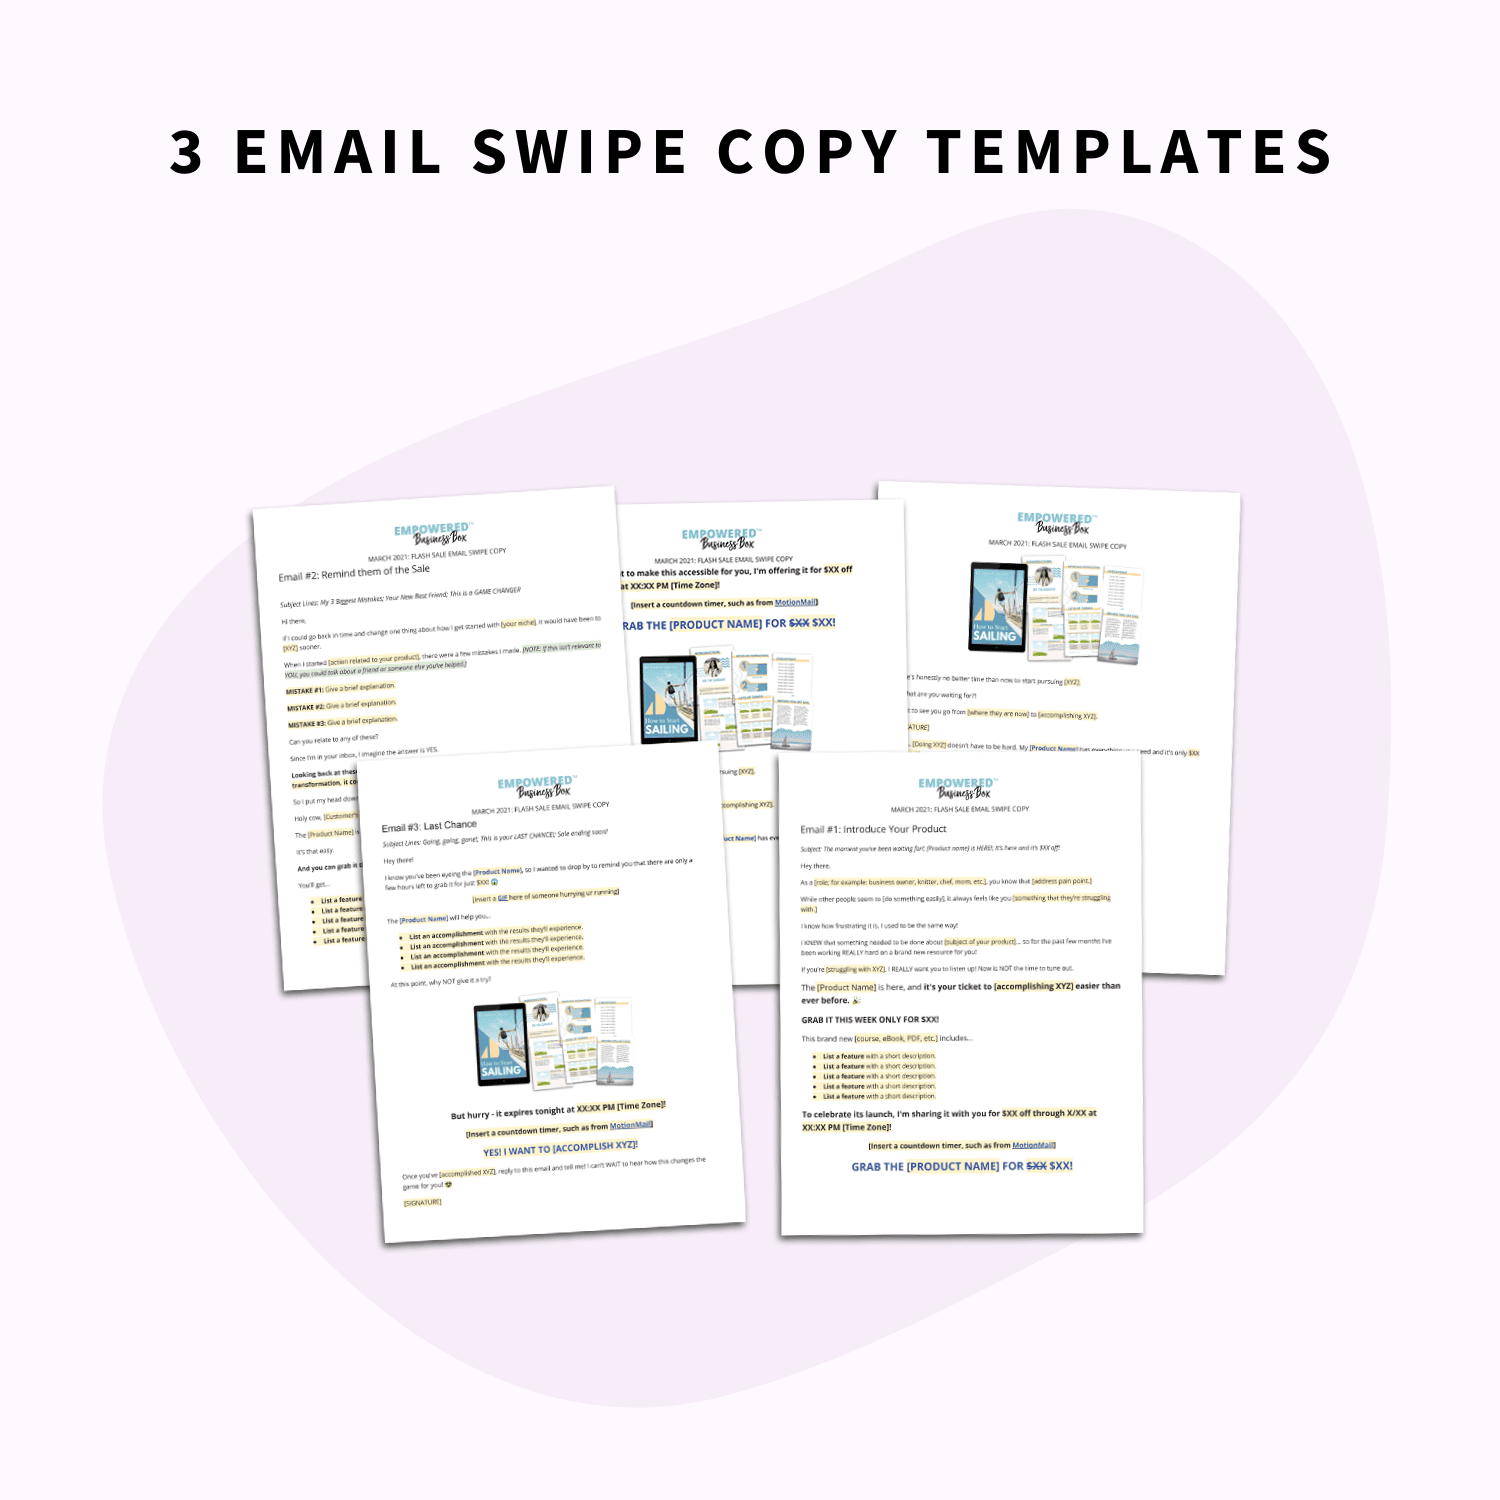 Email Swipe Copy Templates in the Create and Execute an Easy Flash Sale Toolbox